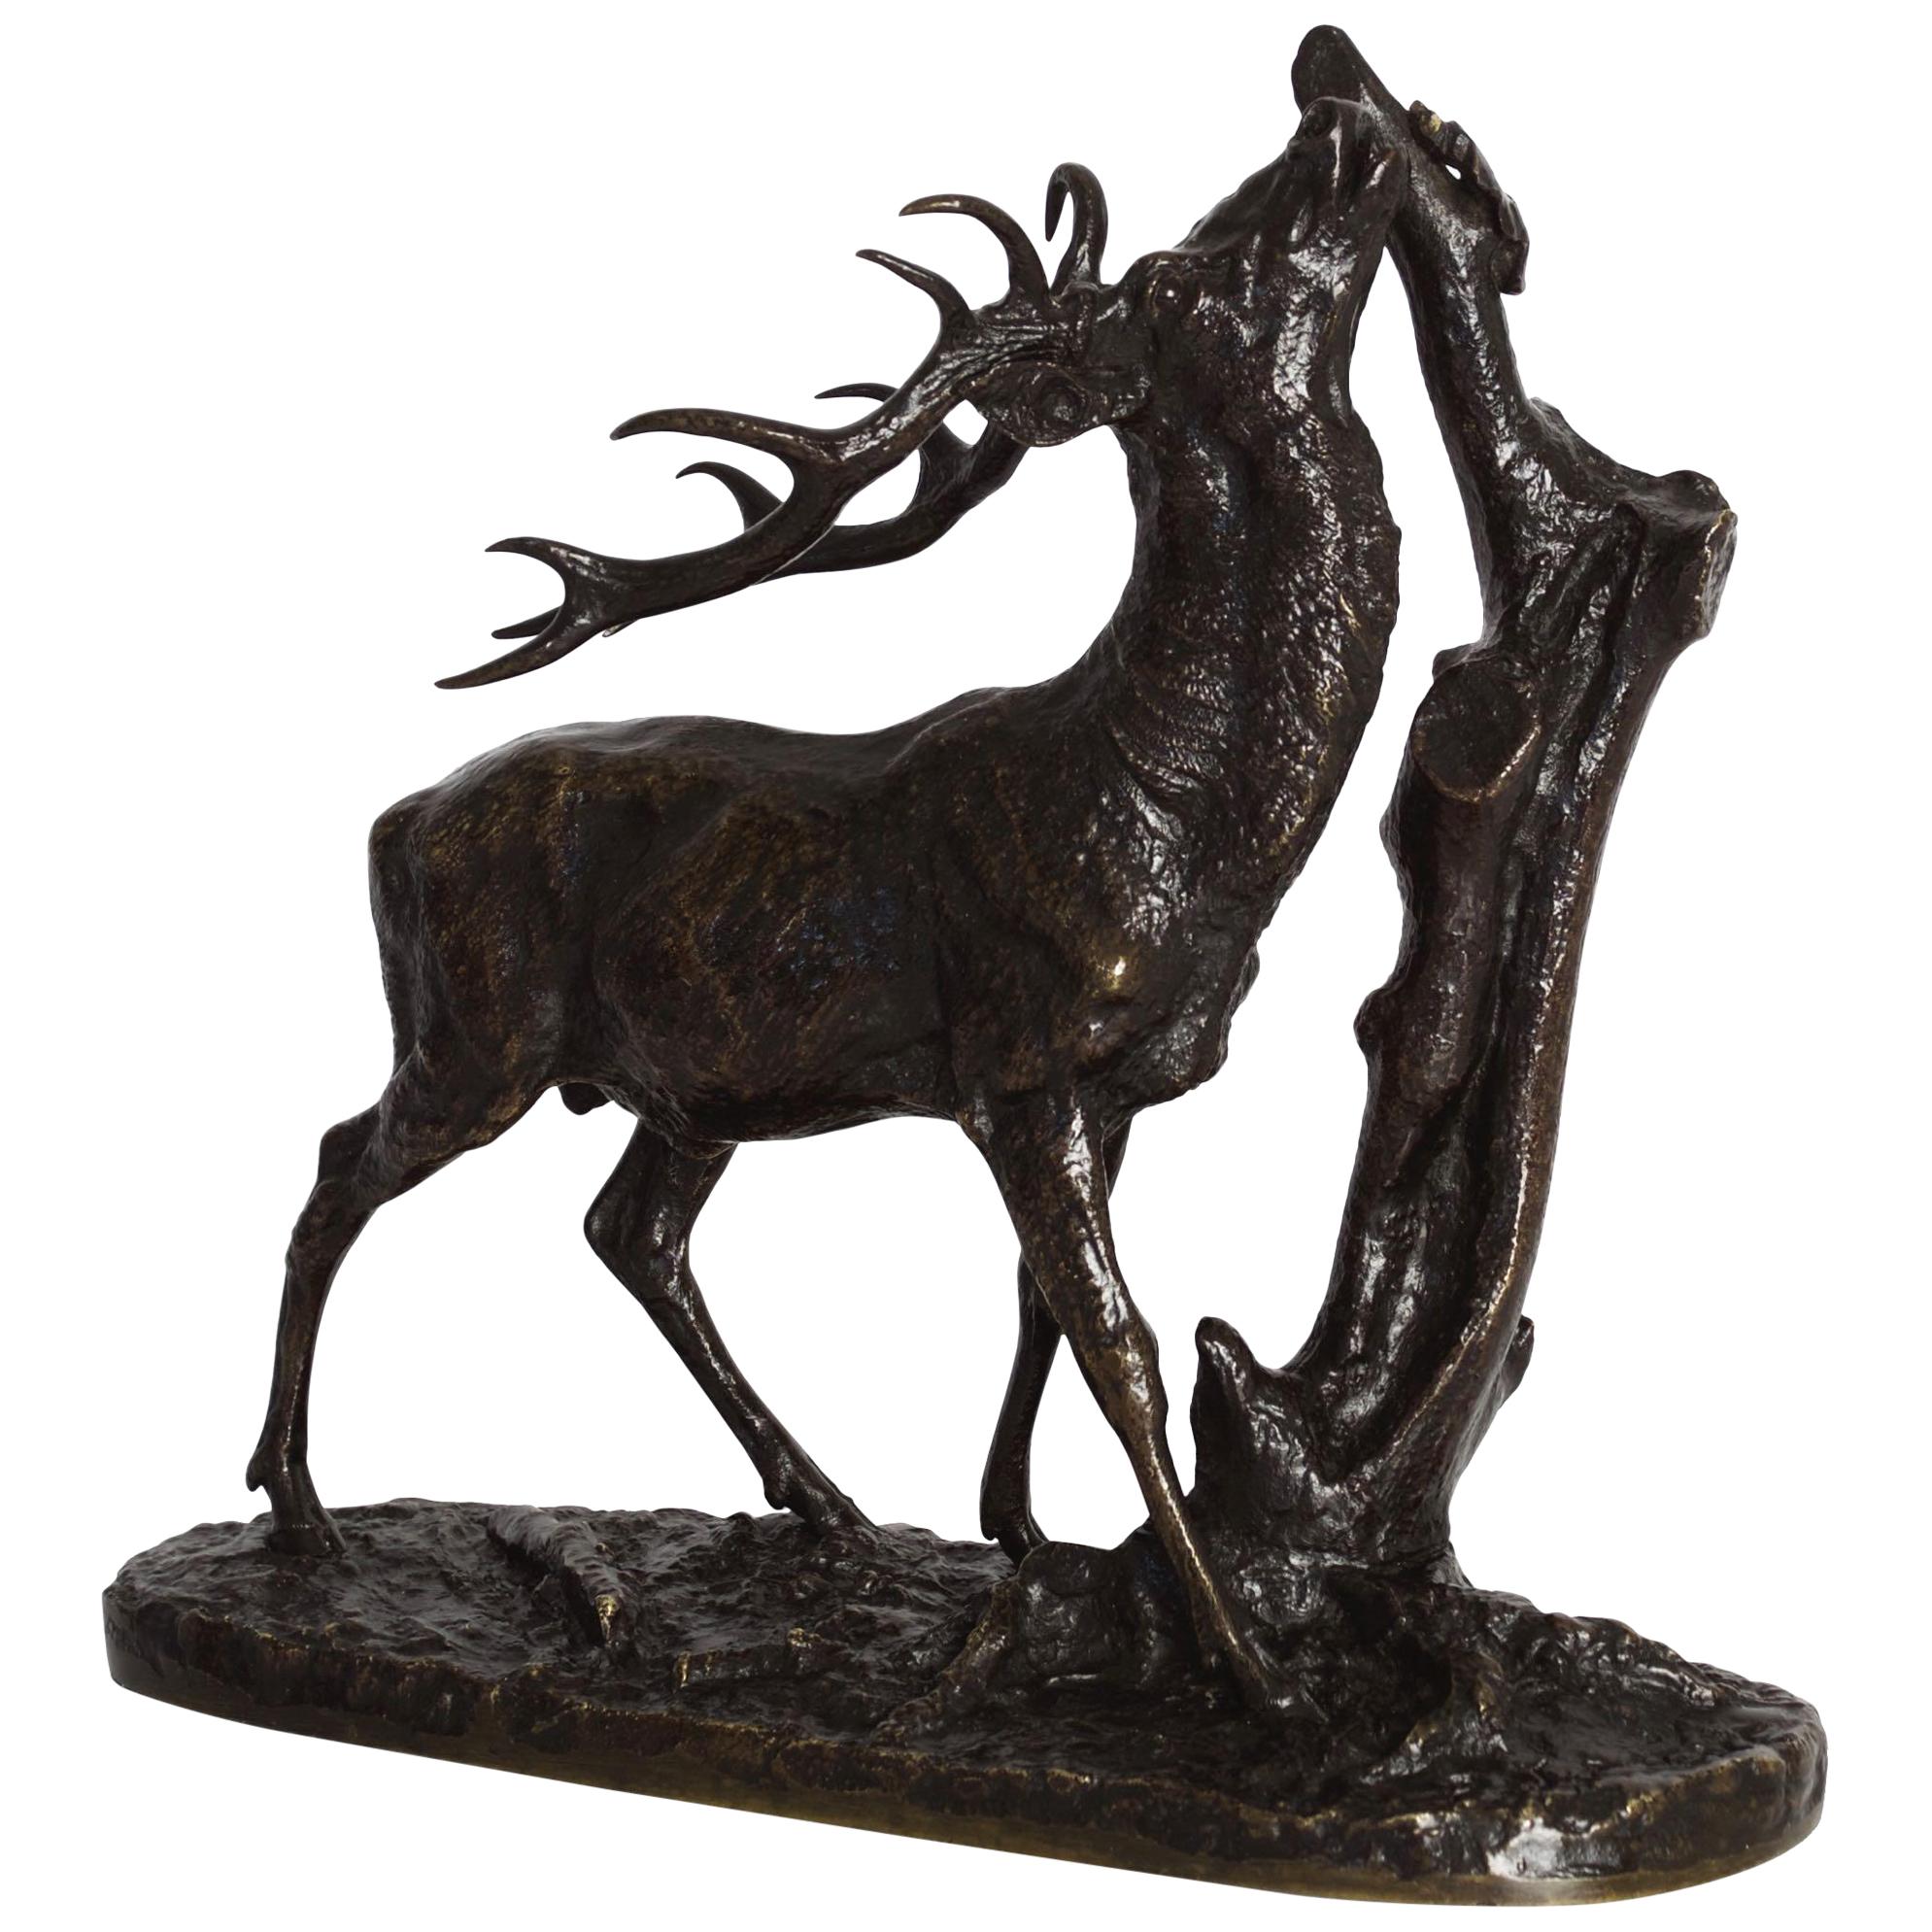 “Browsing Stag” 1843 Antique French Bronze Sculpture by Pierre Jules Mene For Sale